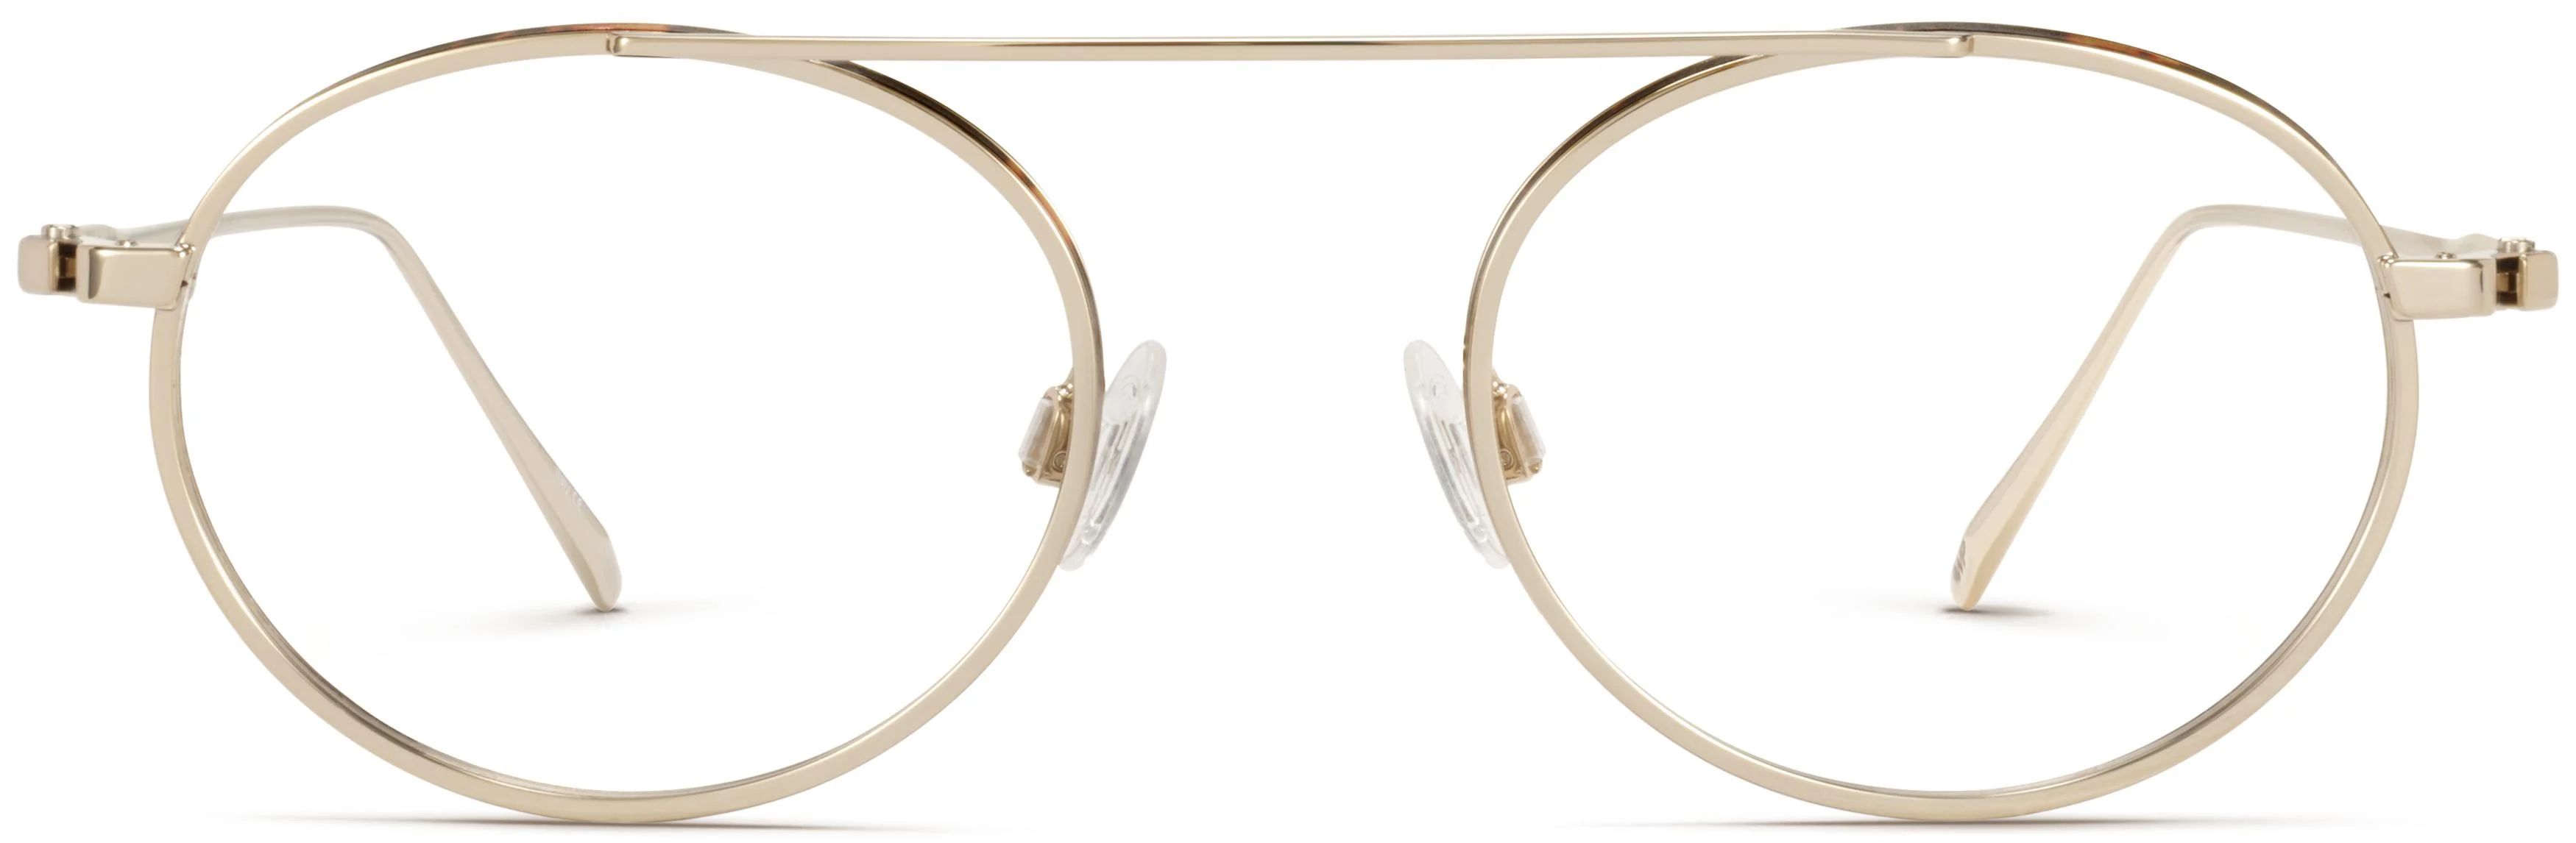 Corwin Eyeglasses in Polished Gold with Whiskey Tortoise Matte | Warby Parker | Warby Parker (US)